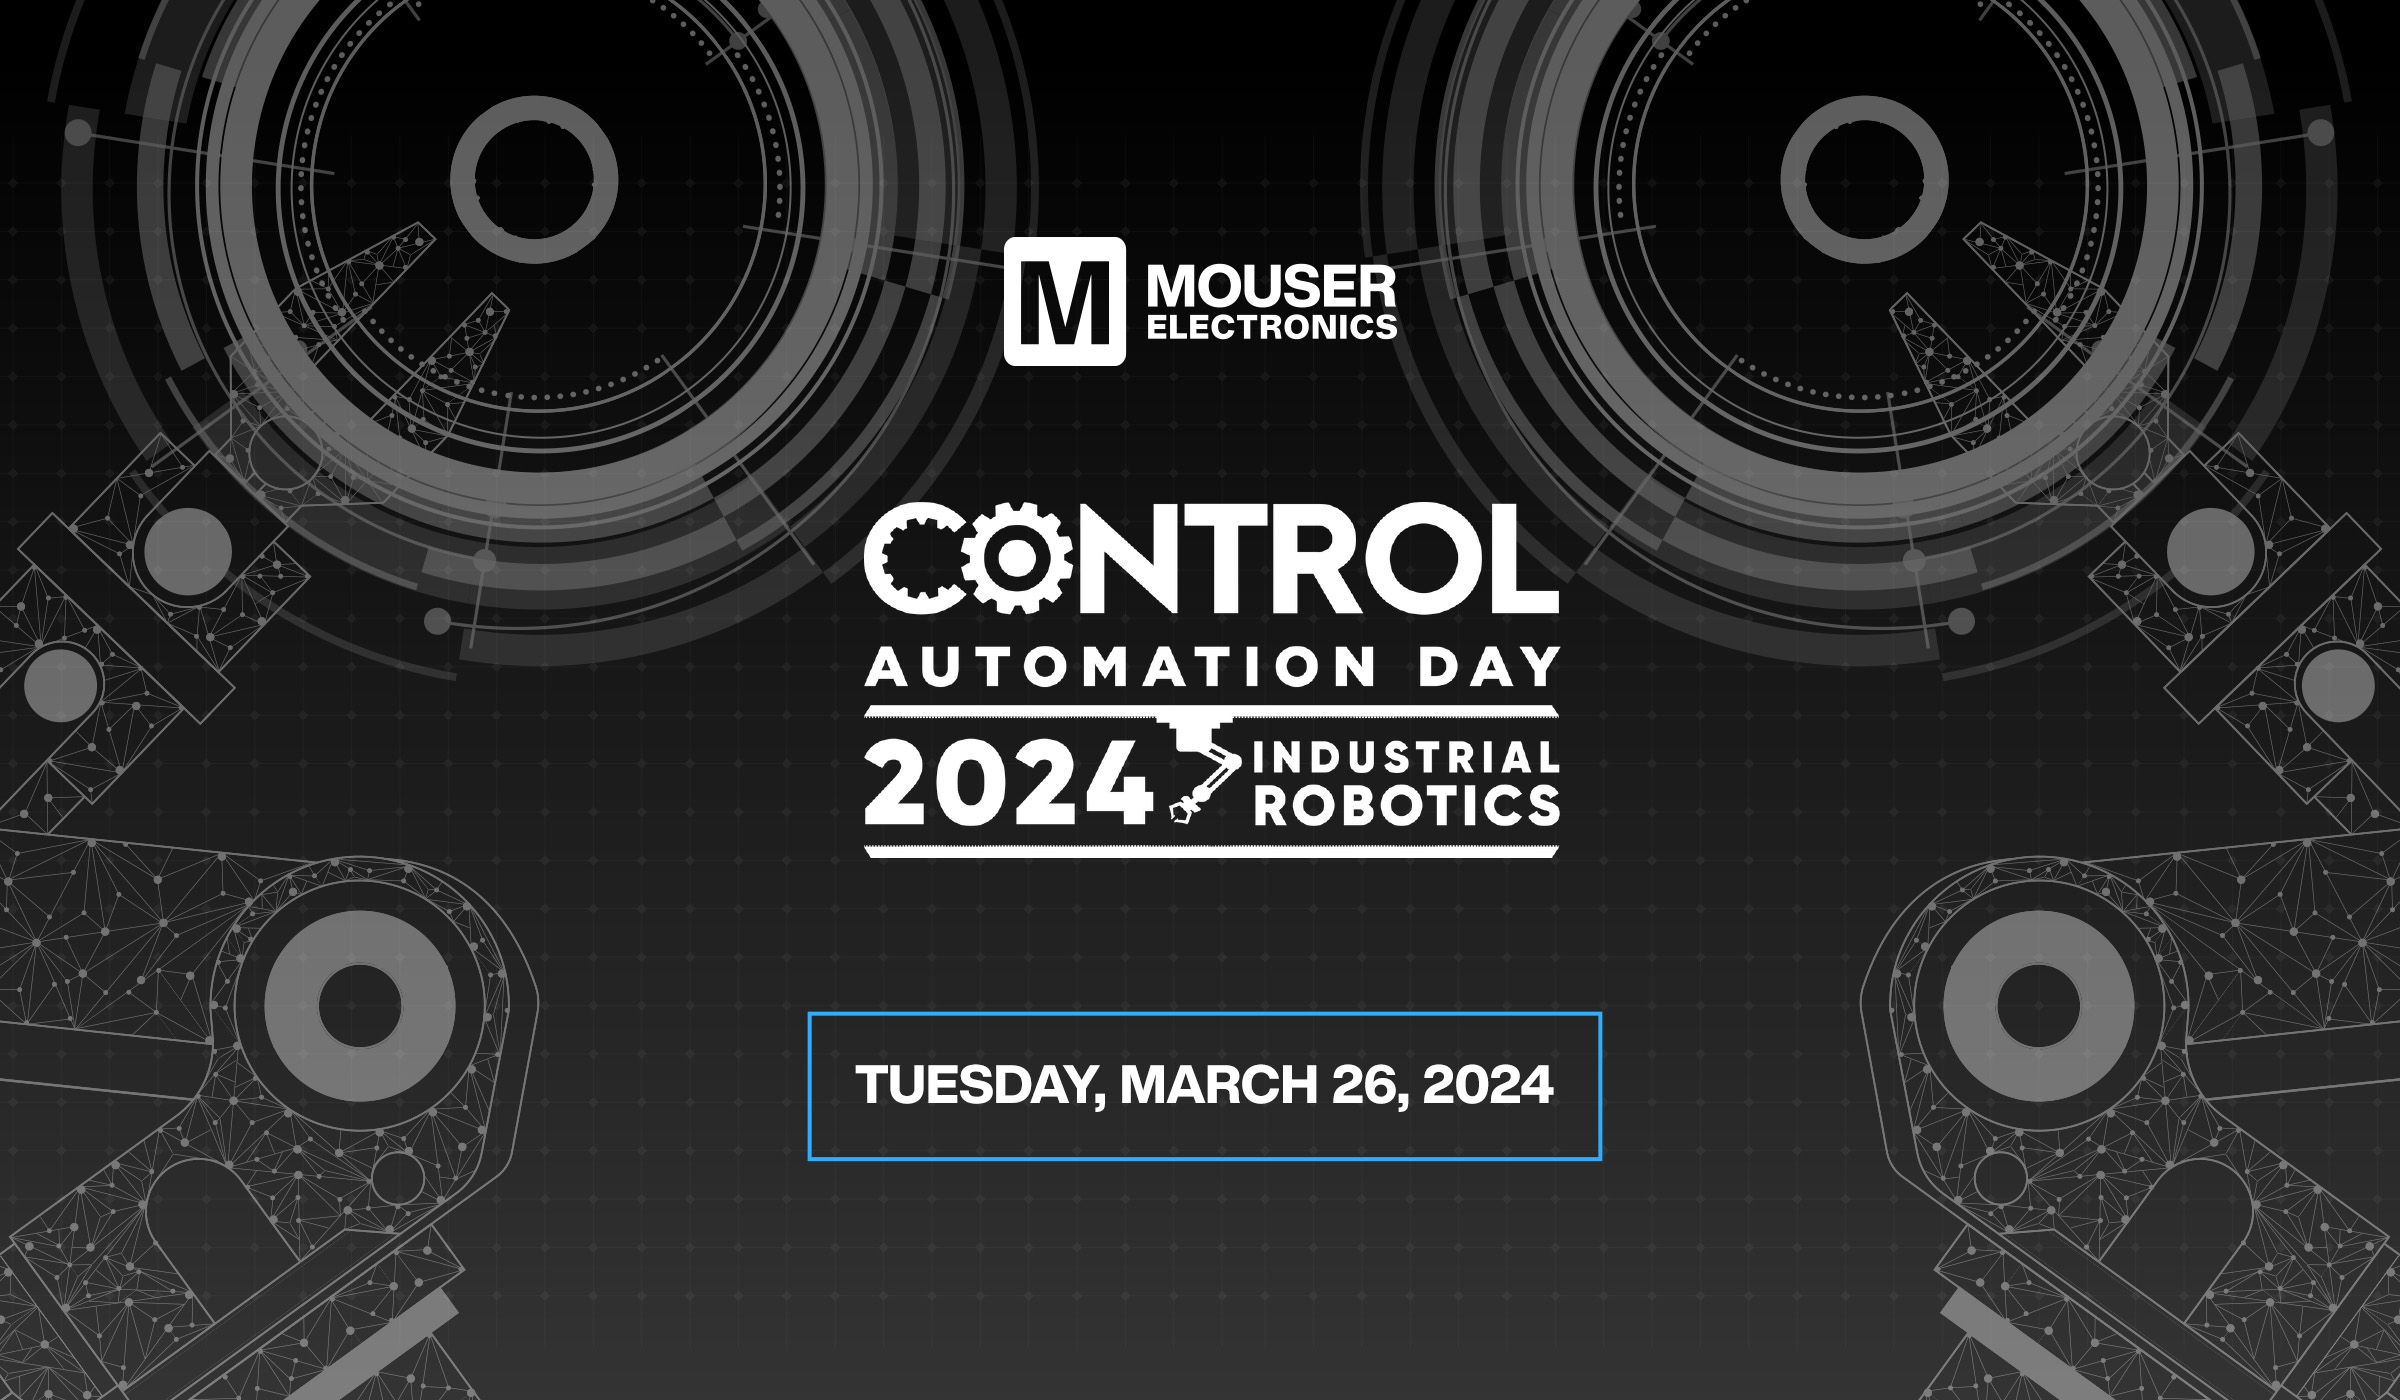 Mouser Electronics Named Major Sponsor of Control Automation Day